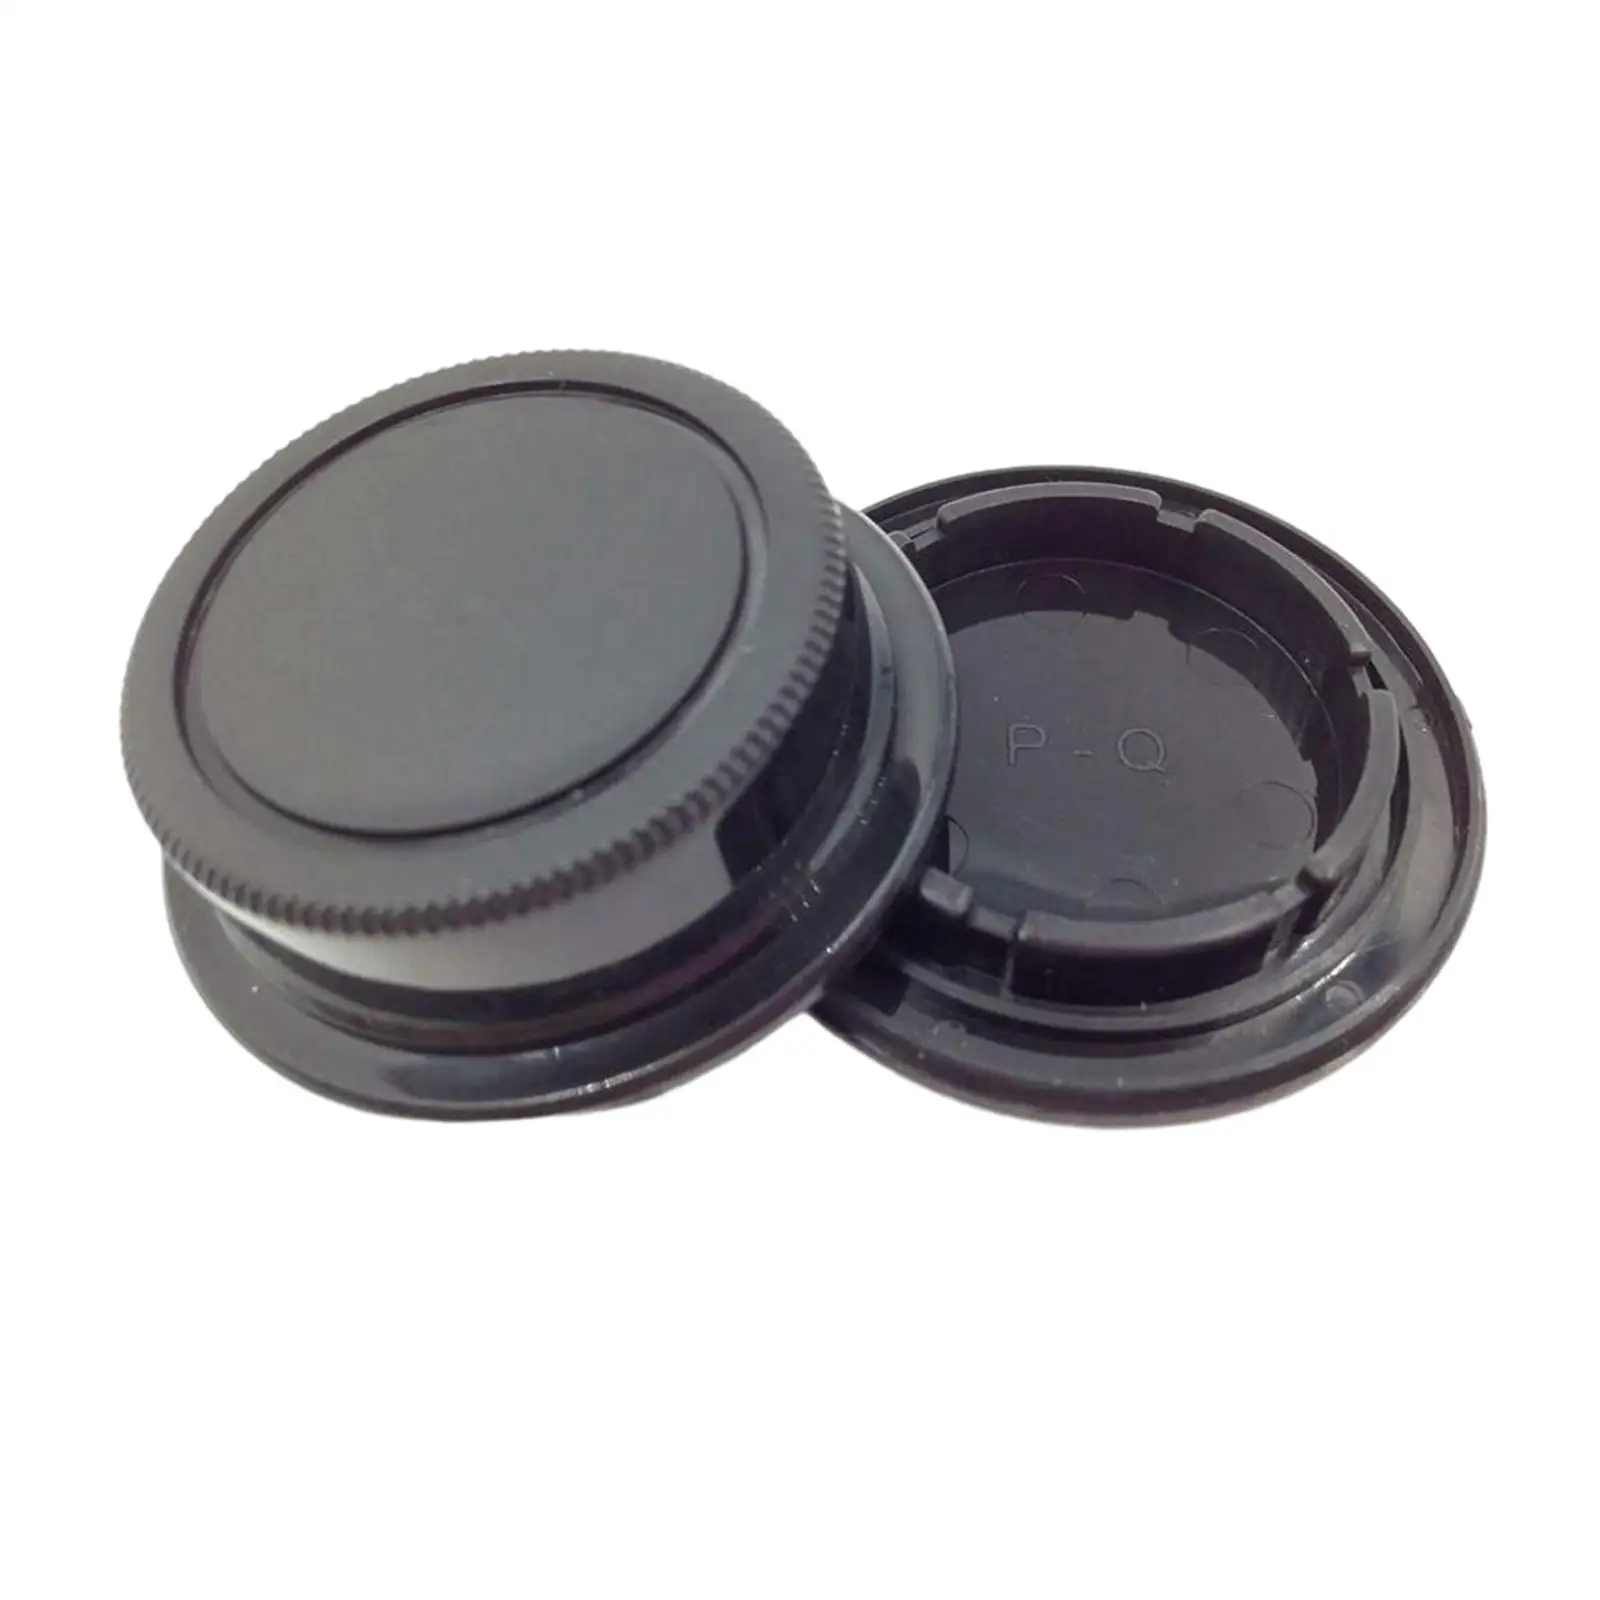 2 Pieces Camera Body and Rear Lens Caps Dustproof  Set Rear Lens Protector Cover for Cameras+Lenses